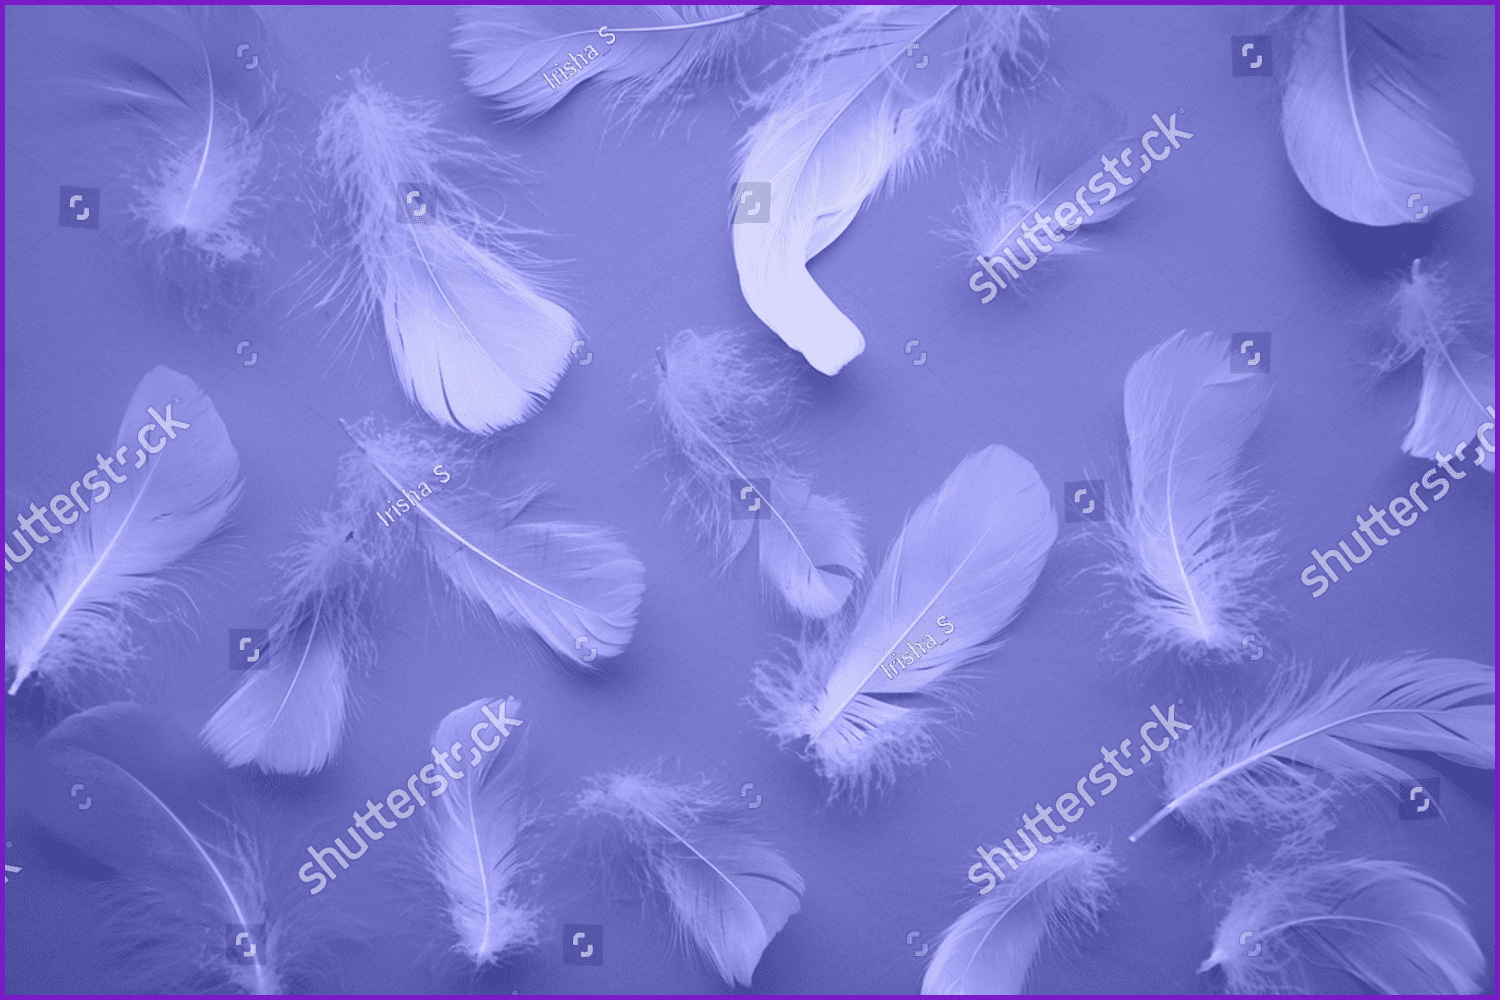 Light feathers on a purple background.